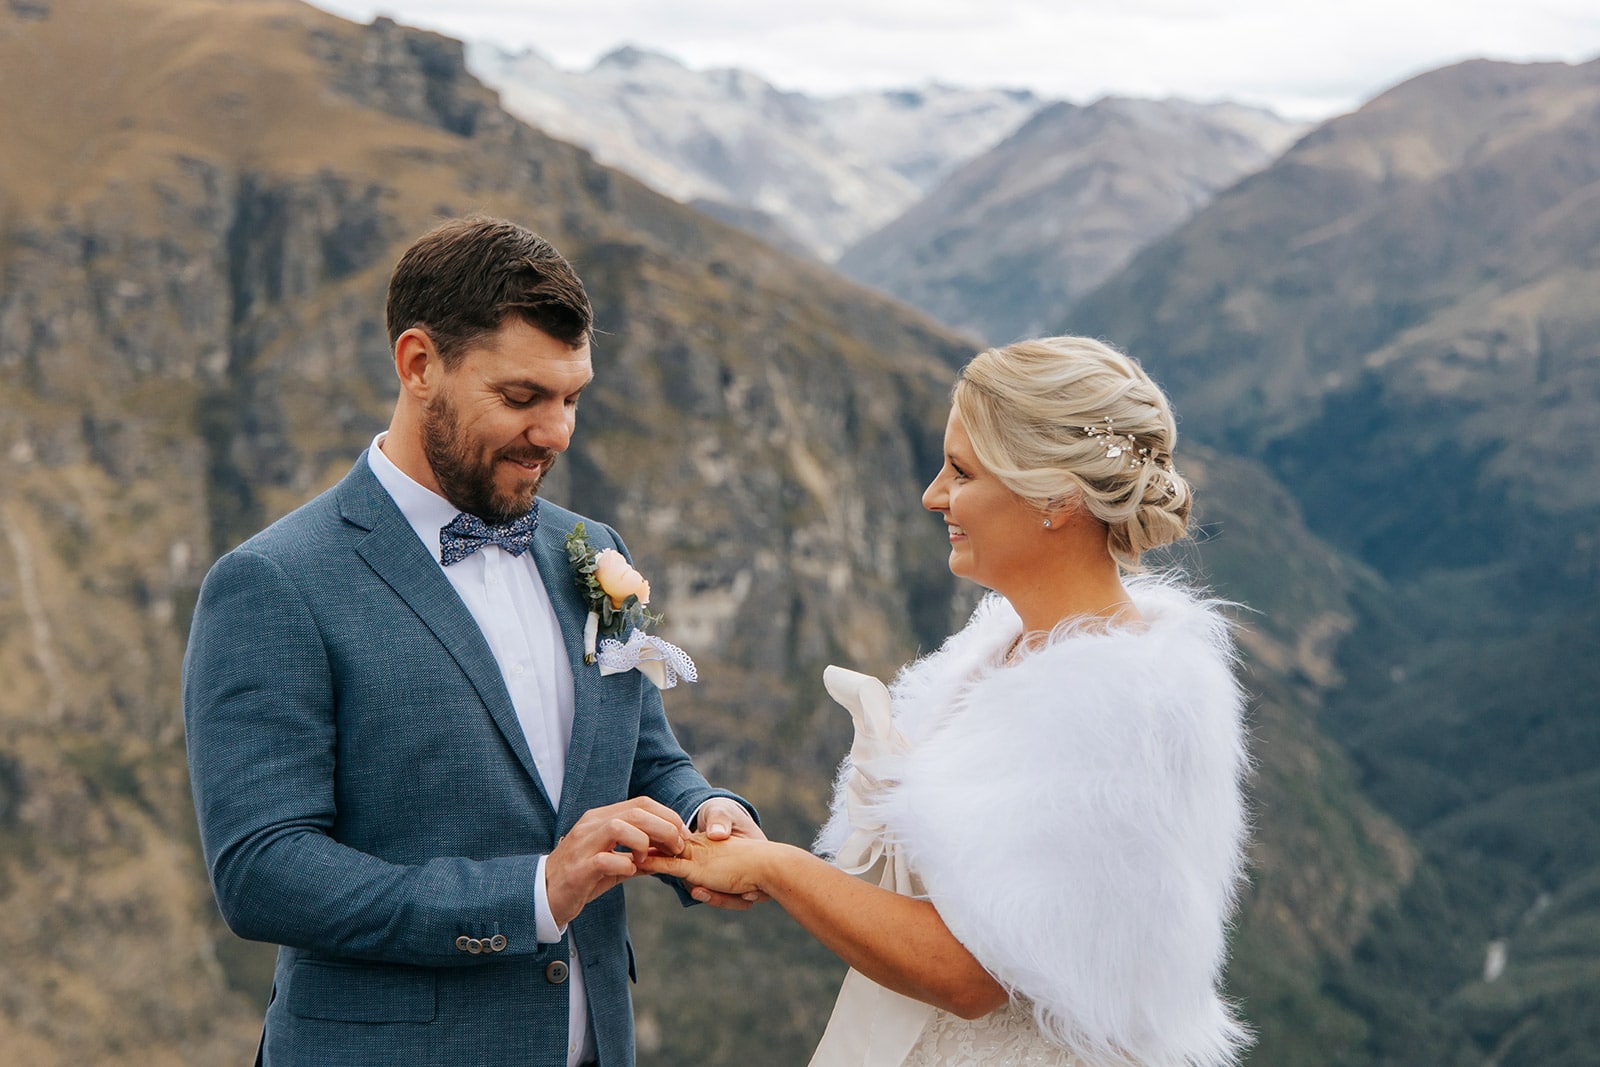 nstown Elopement Destination Wedding by helicopter